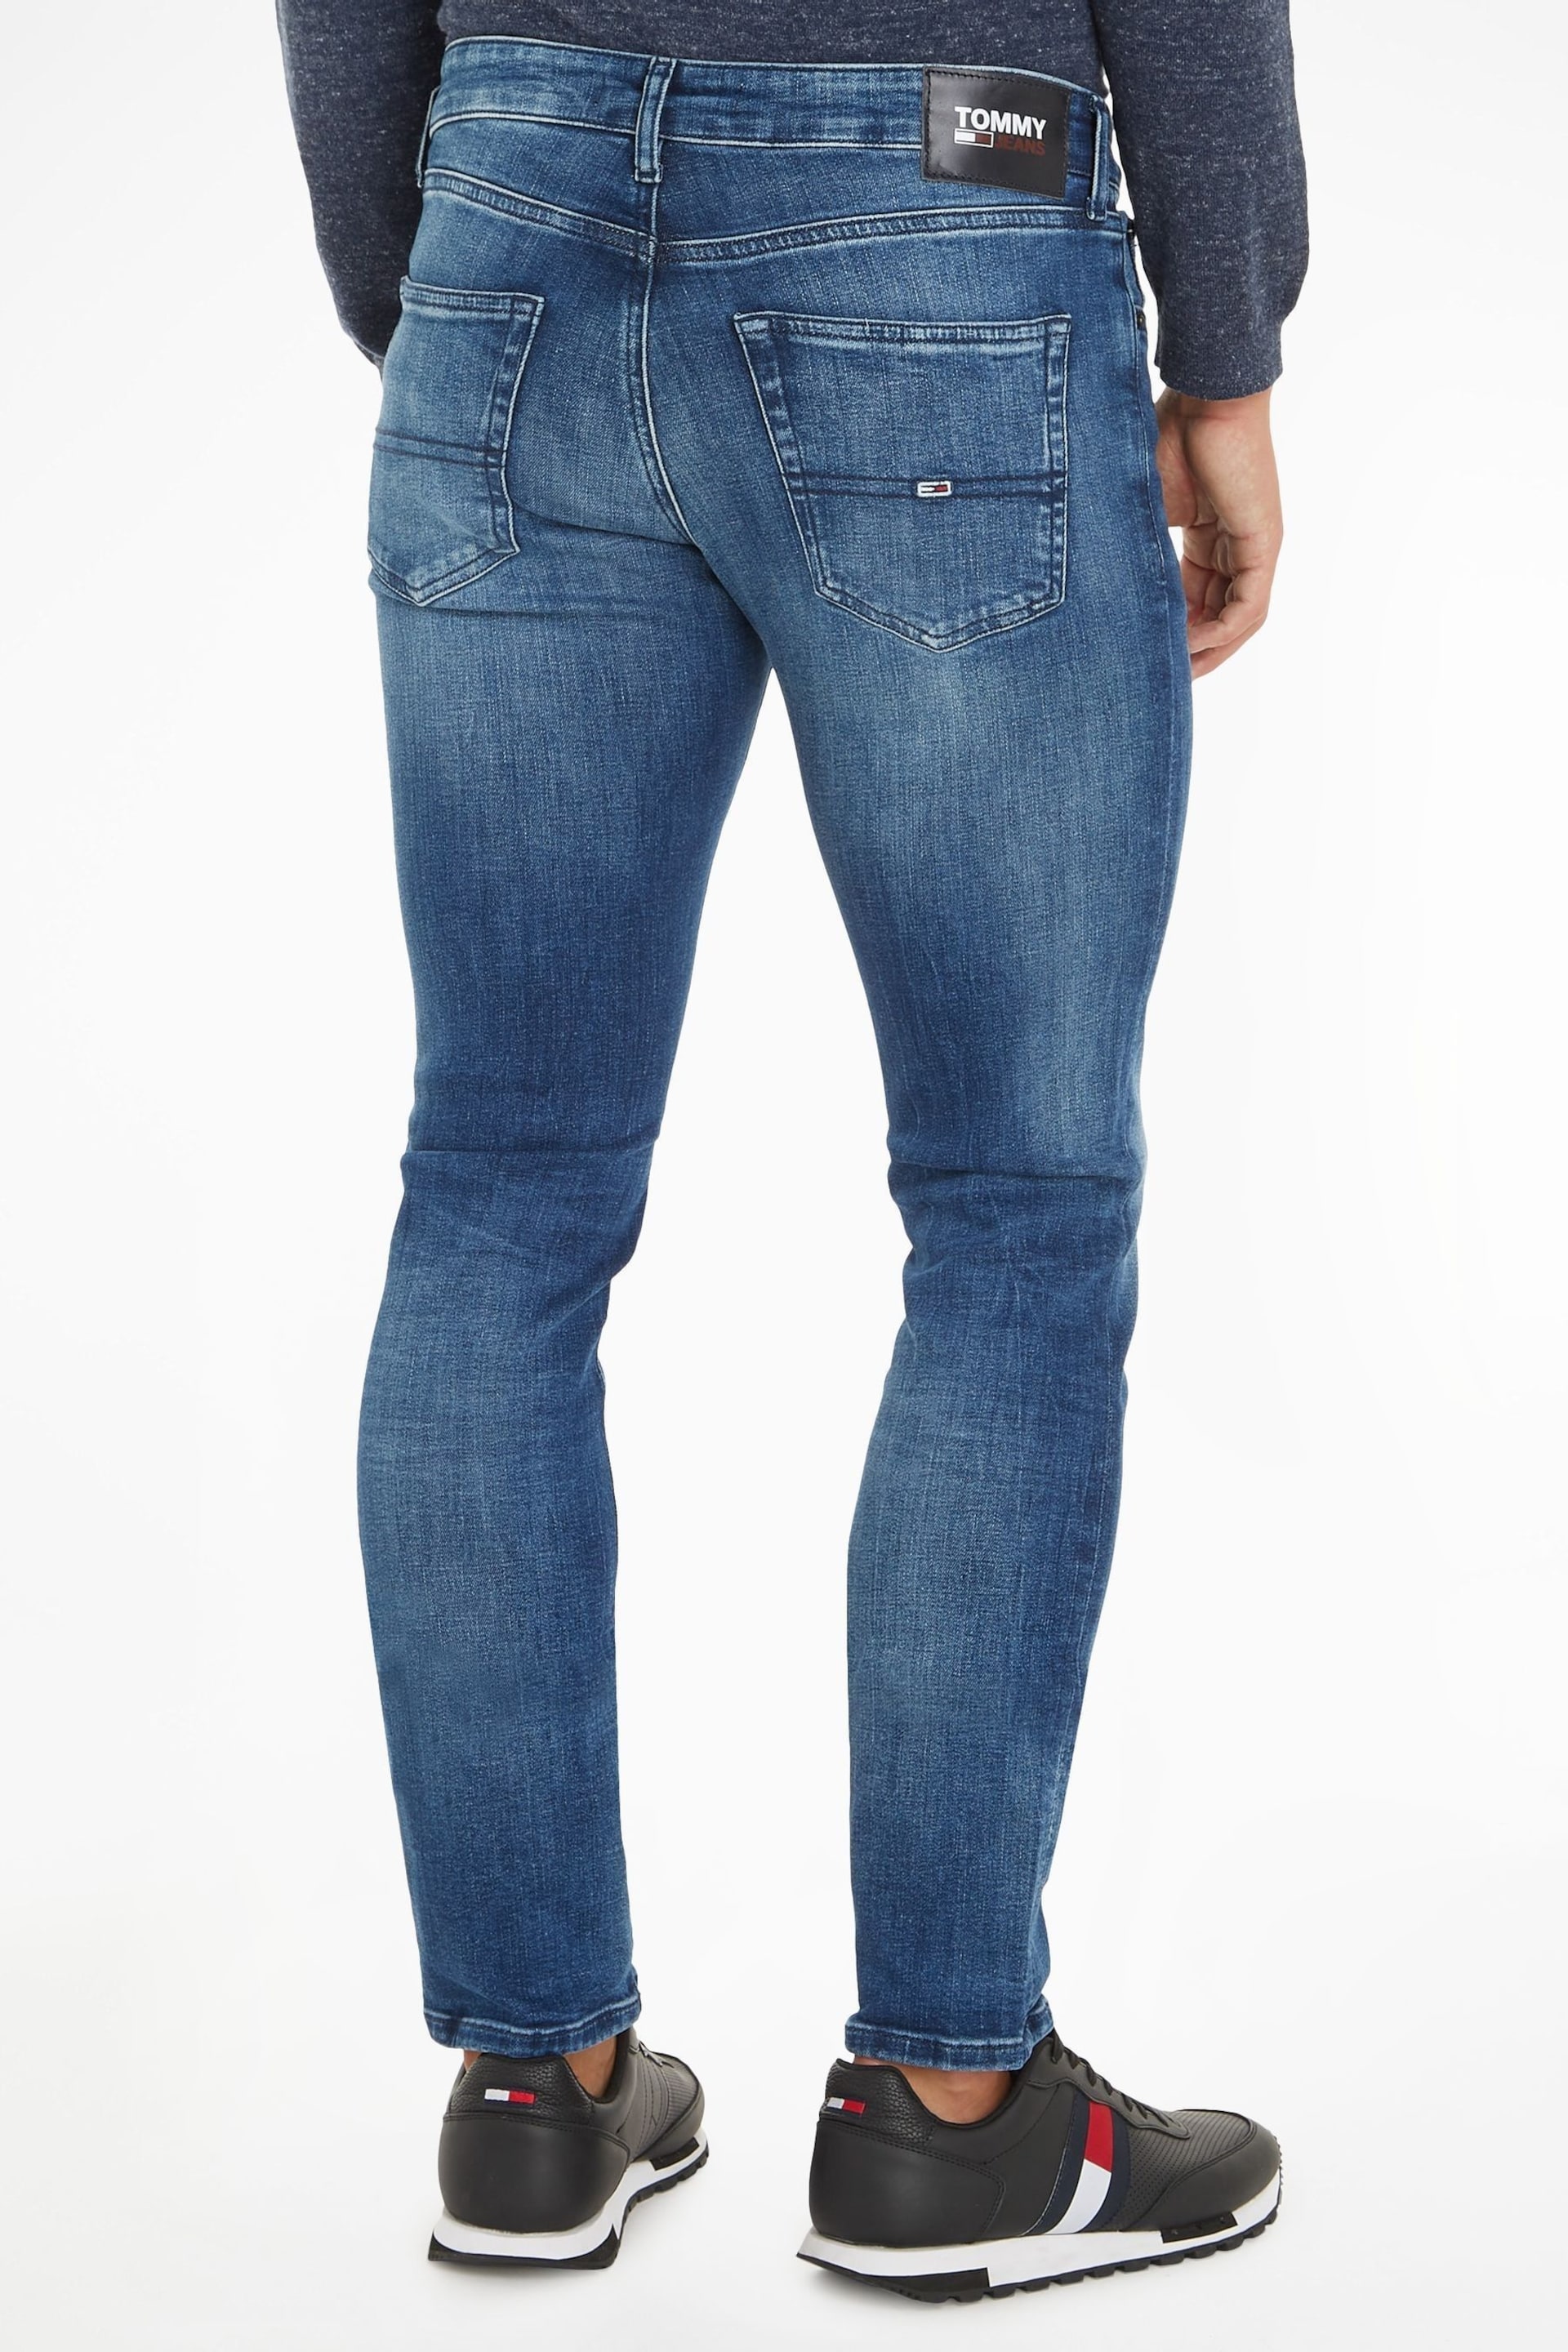 Tommy Jeans Blue Scanton Slim Fit Stretch Jeans - Image 2 of 6